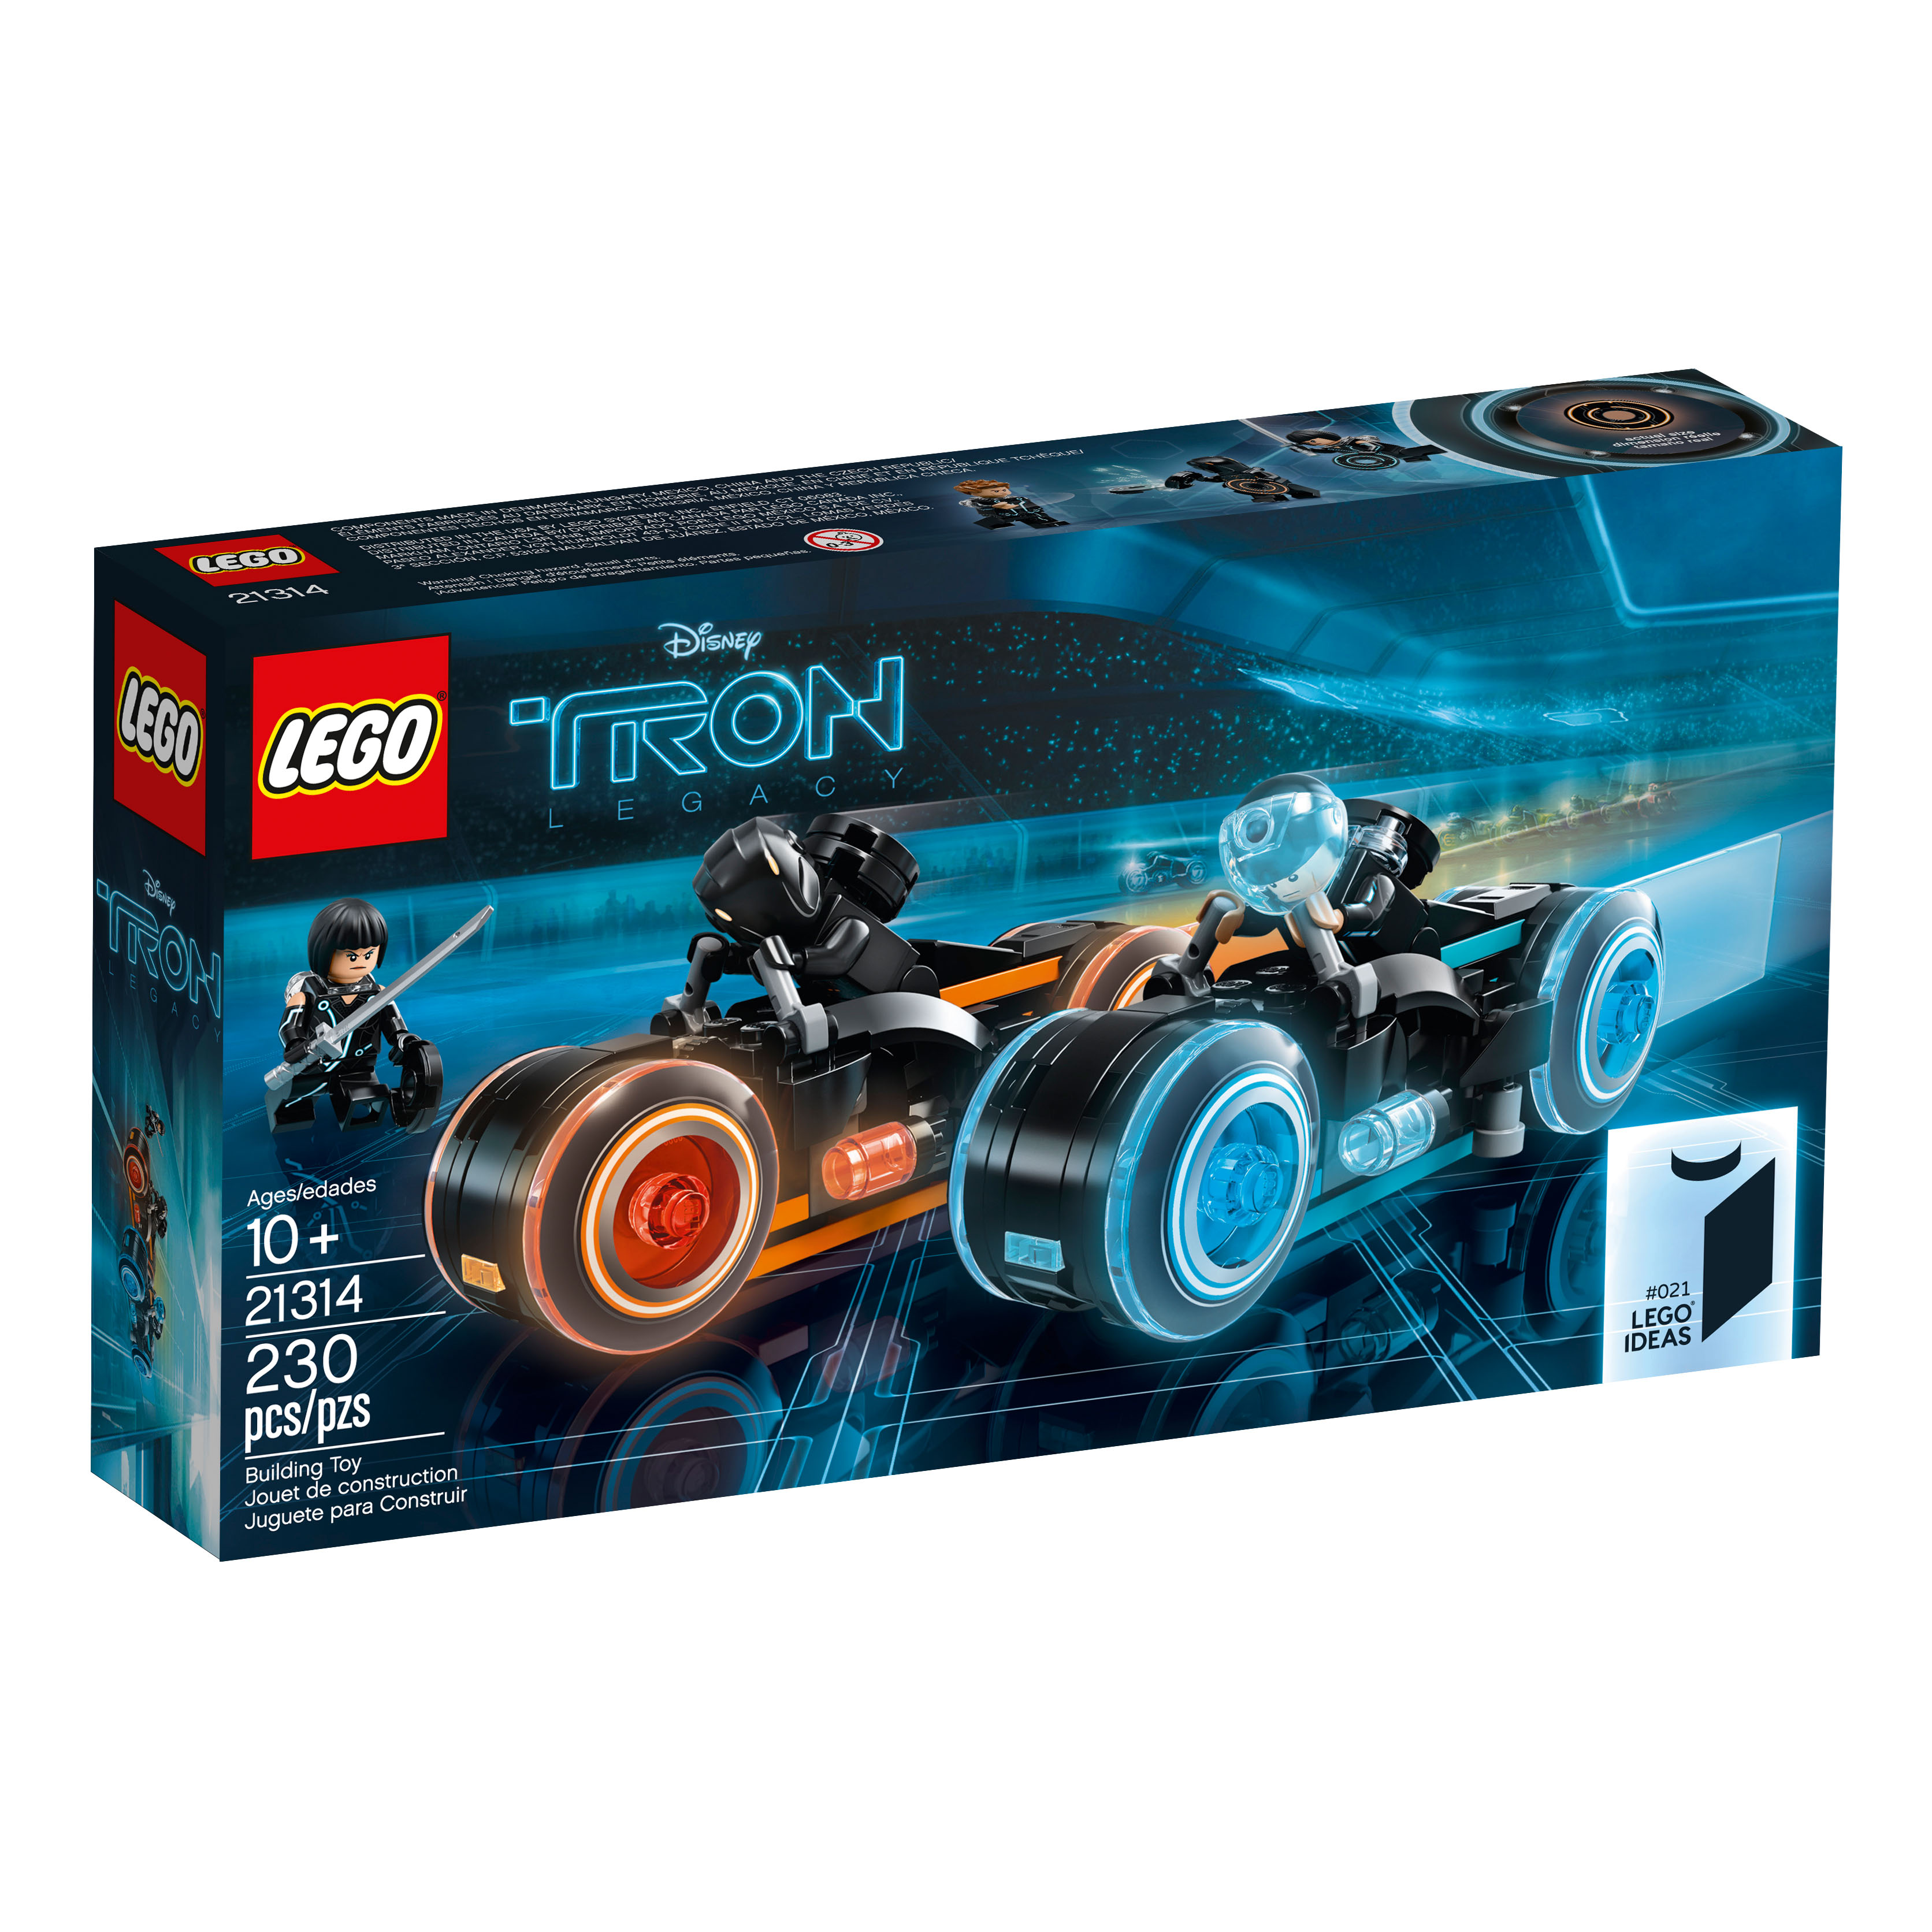 Lego Set NOT Included Brick Loot Original Deluxe LED Light Kit for Your Lego Disney Tron Legacy Set 21314